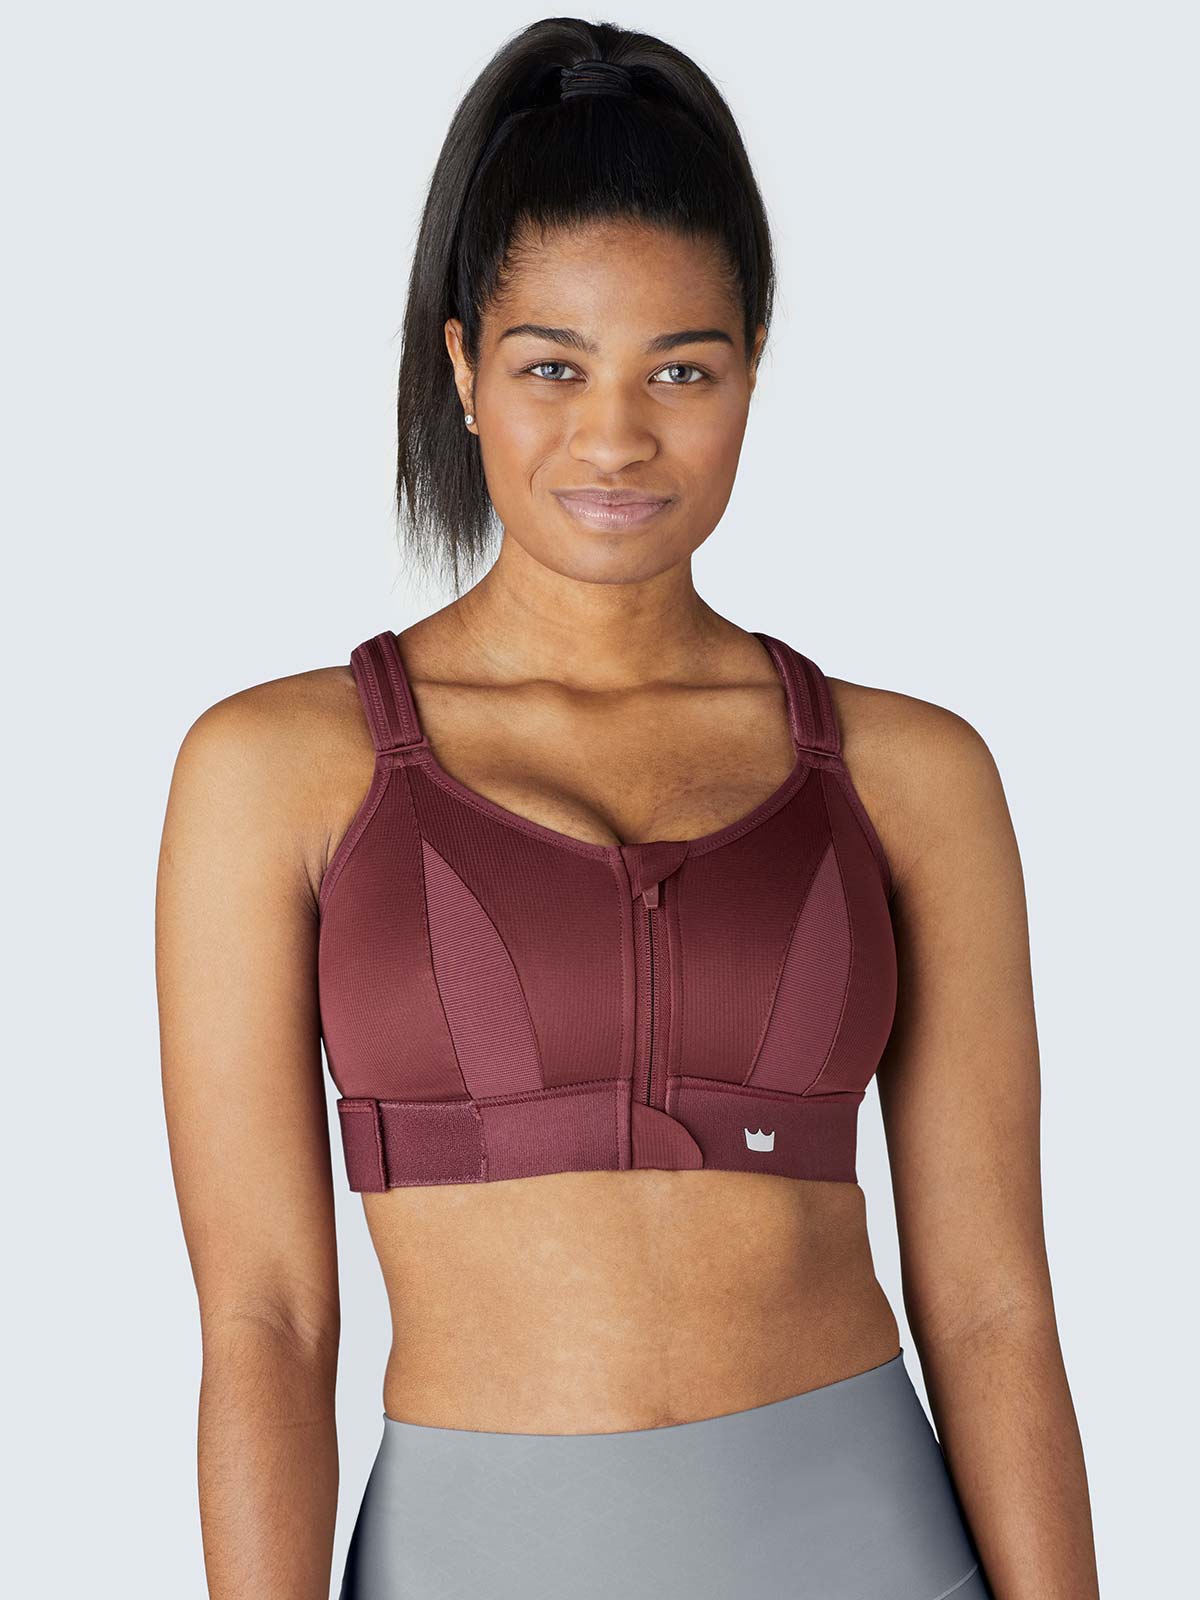 Finding a good sports bra doesn't have to be complicated. #shefit